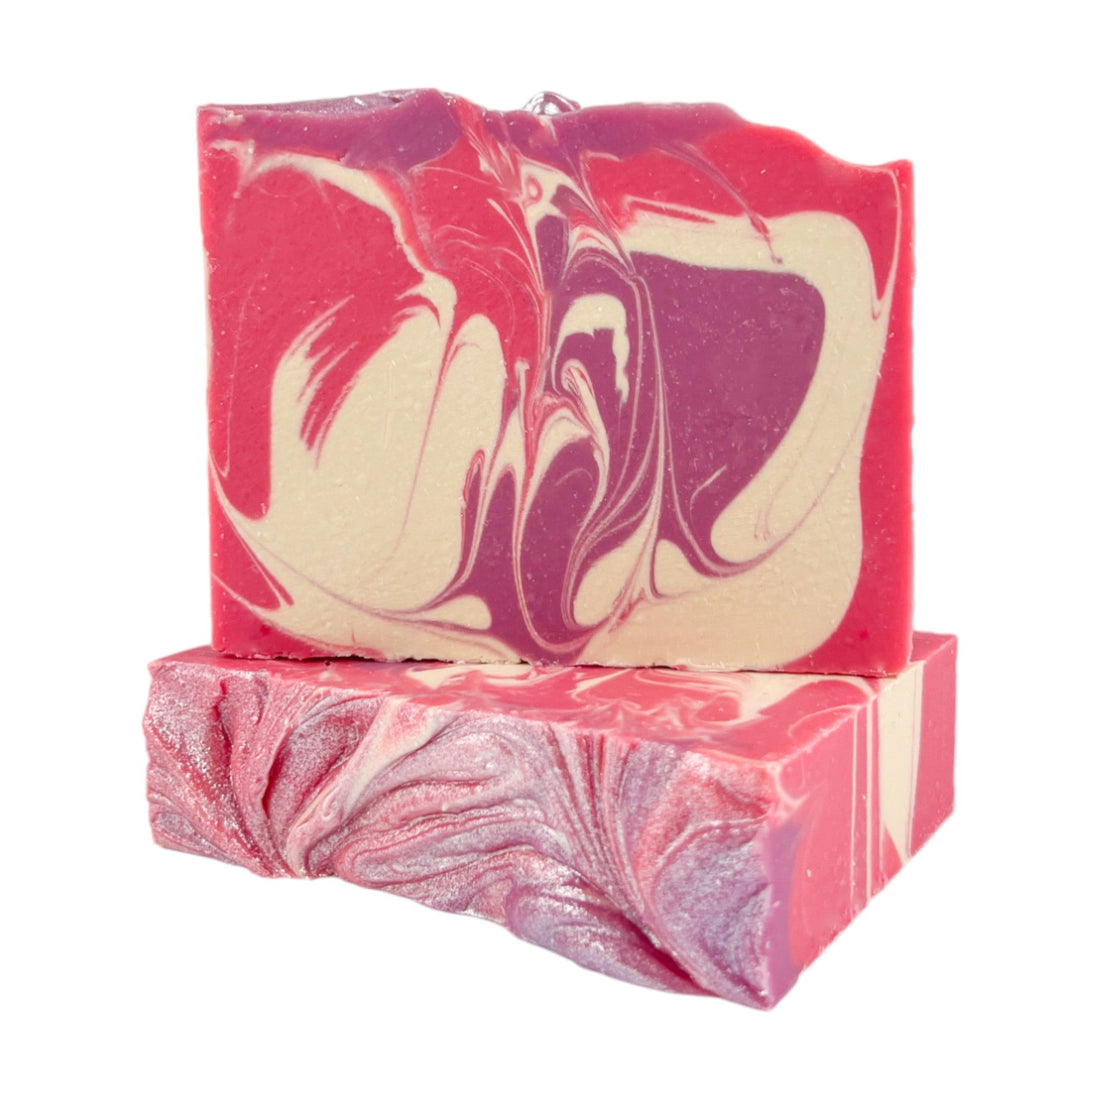 Passionate Kisses -Bar Soap - Old Town Soap Co.